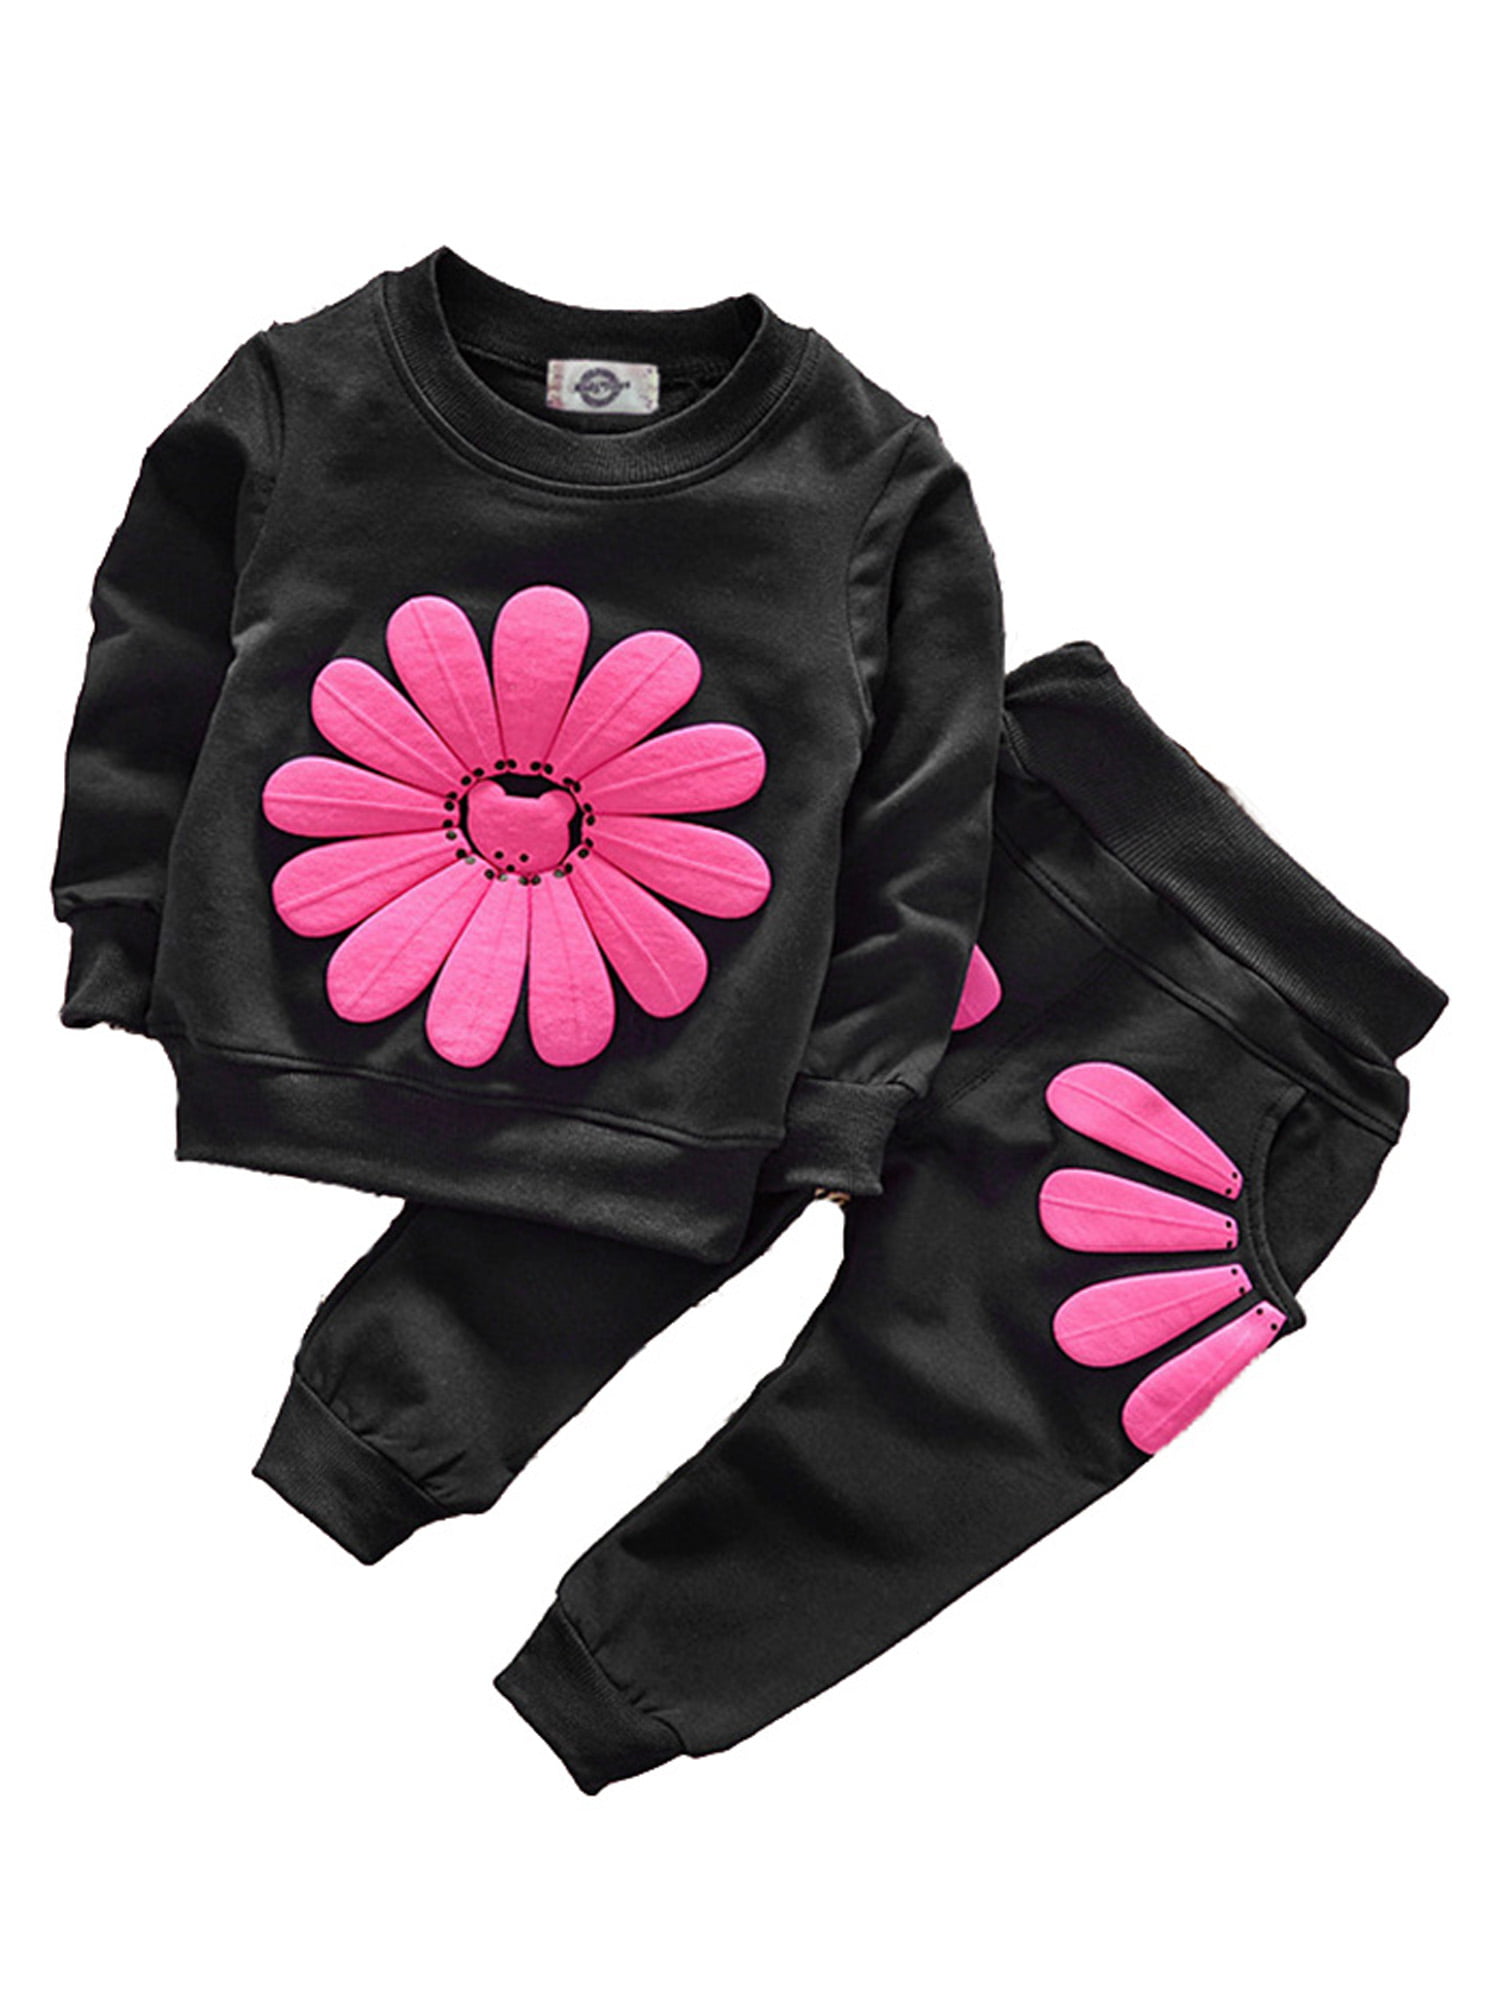 Wodstyle - Toddler Kids Baby Girl Clothes Cotton Sports Tracksuit Tops ...